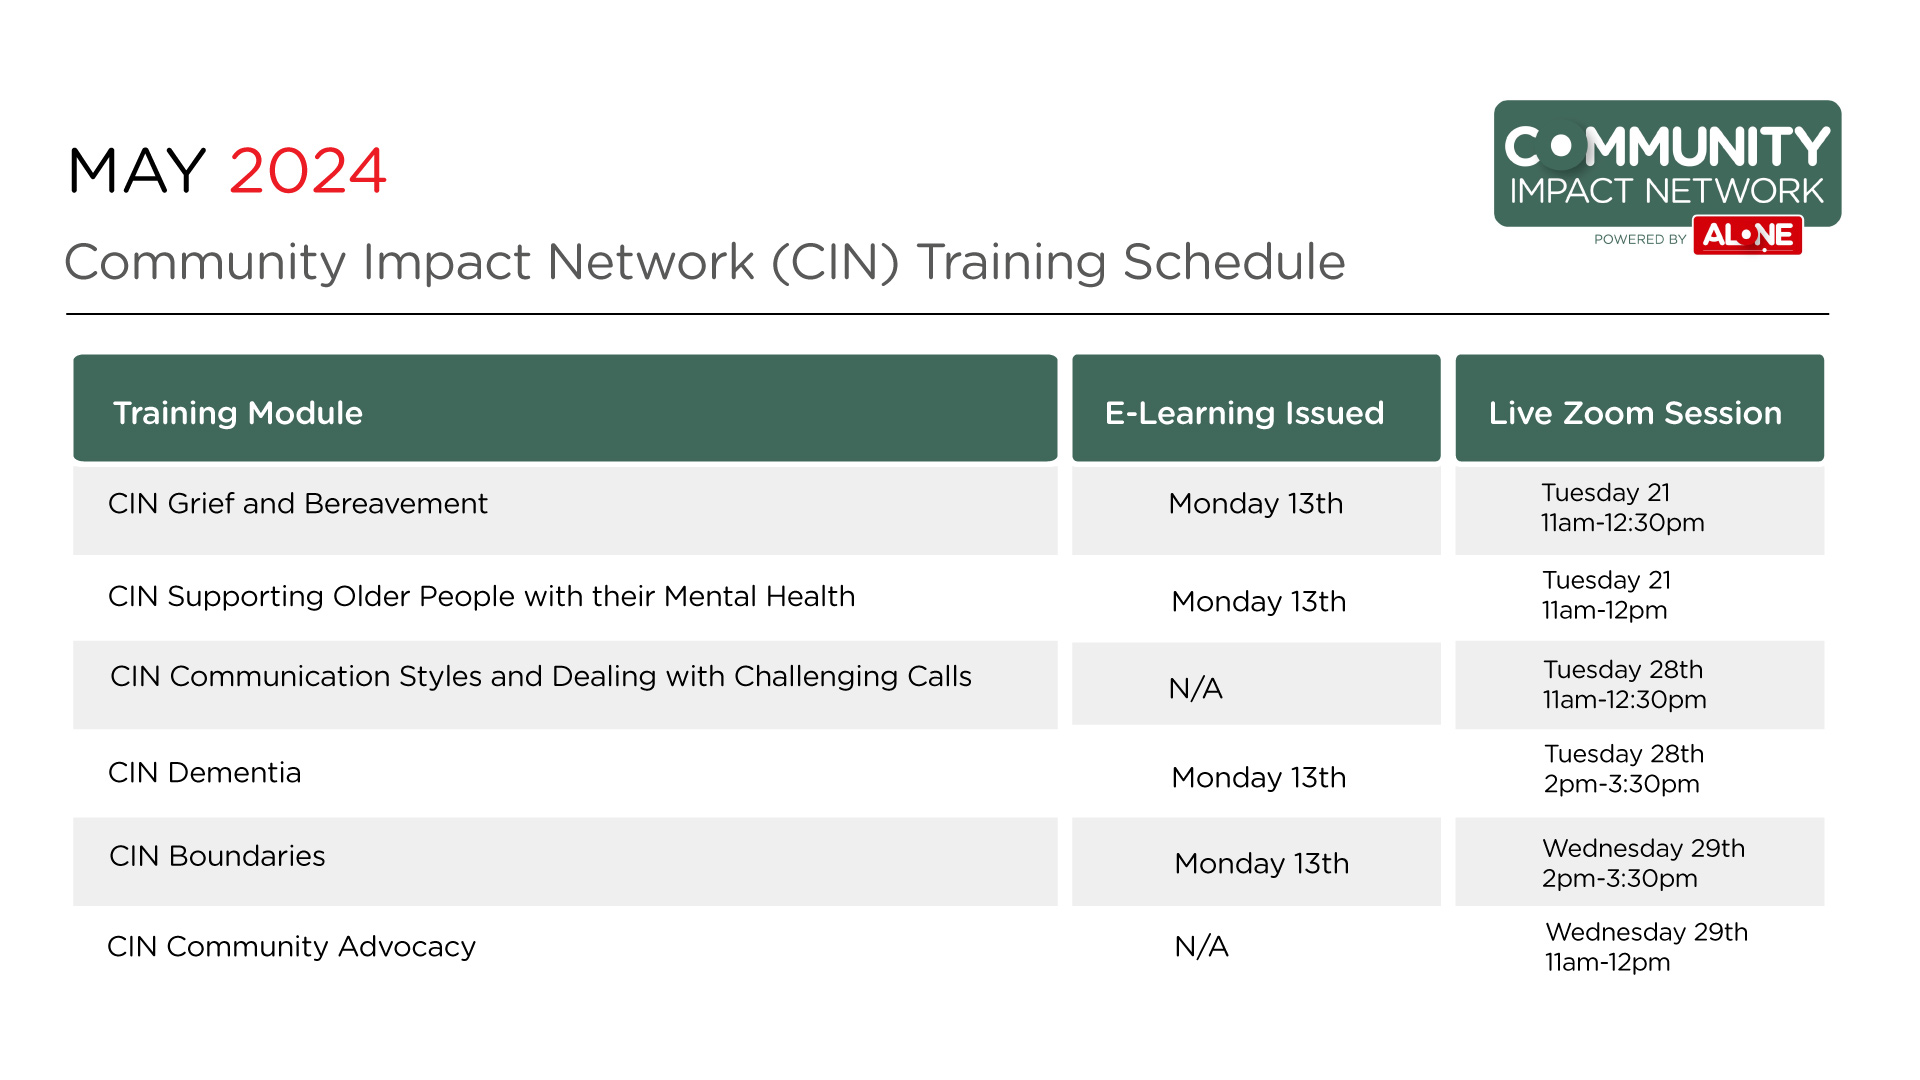 MAY 2024 Training Schedule